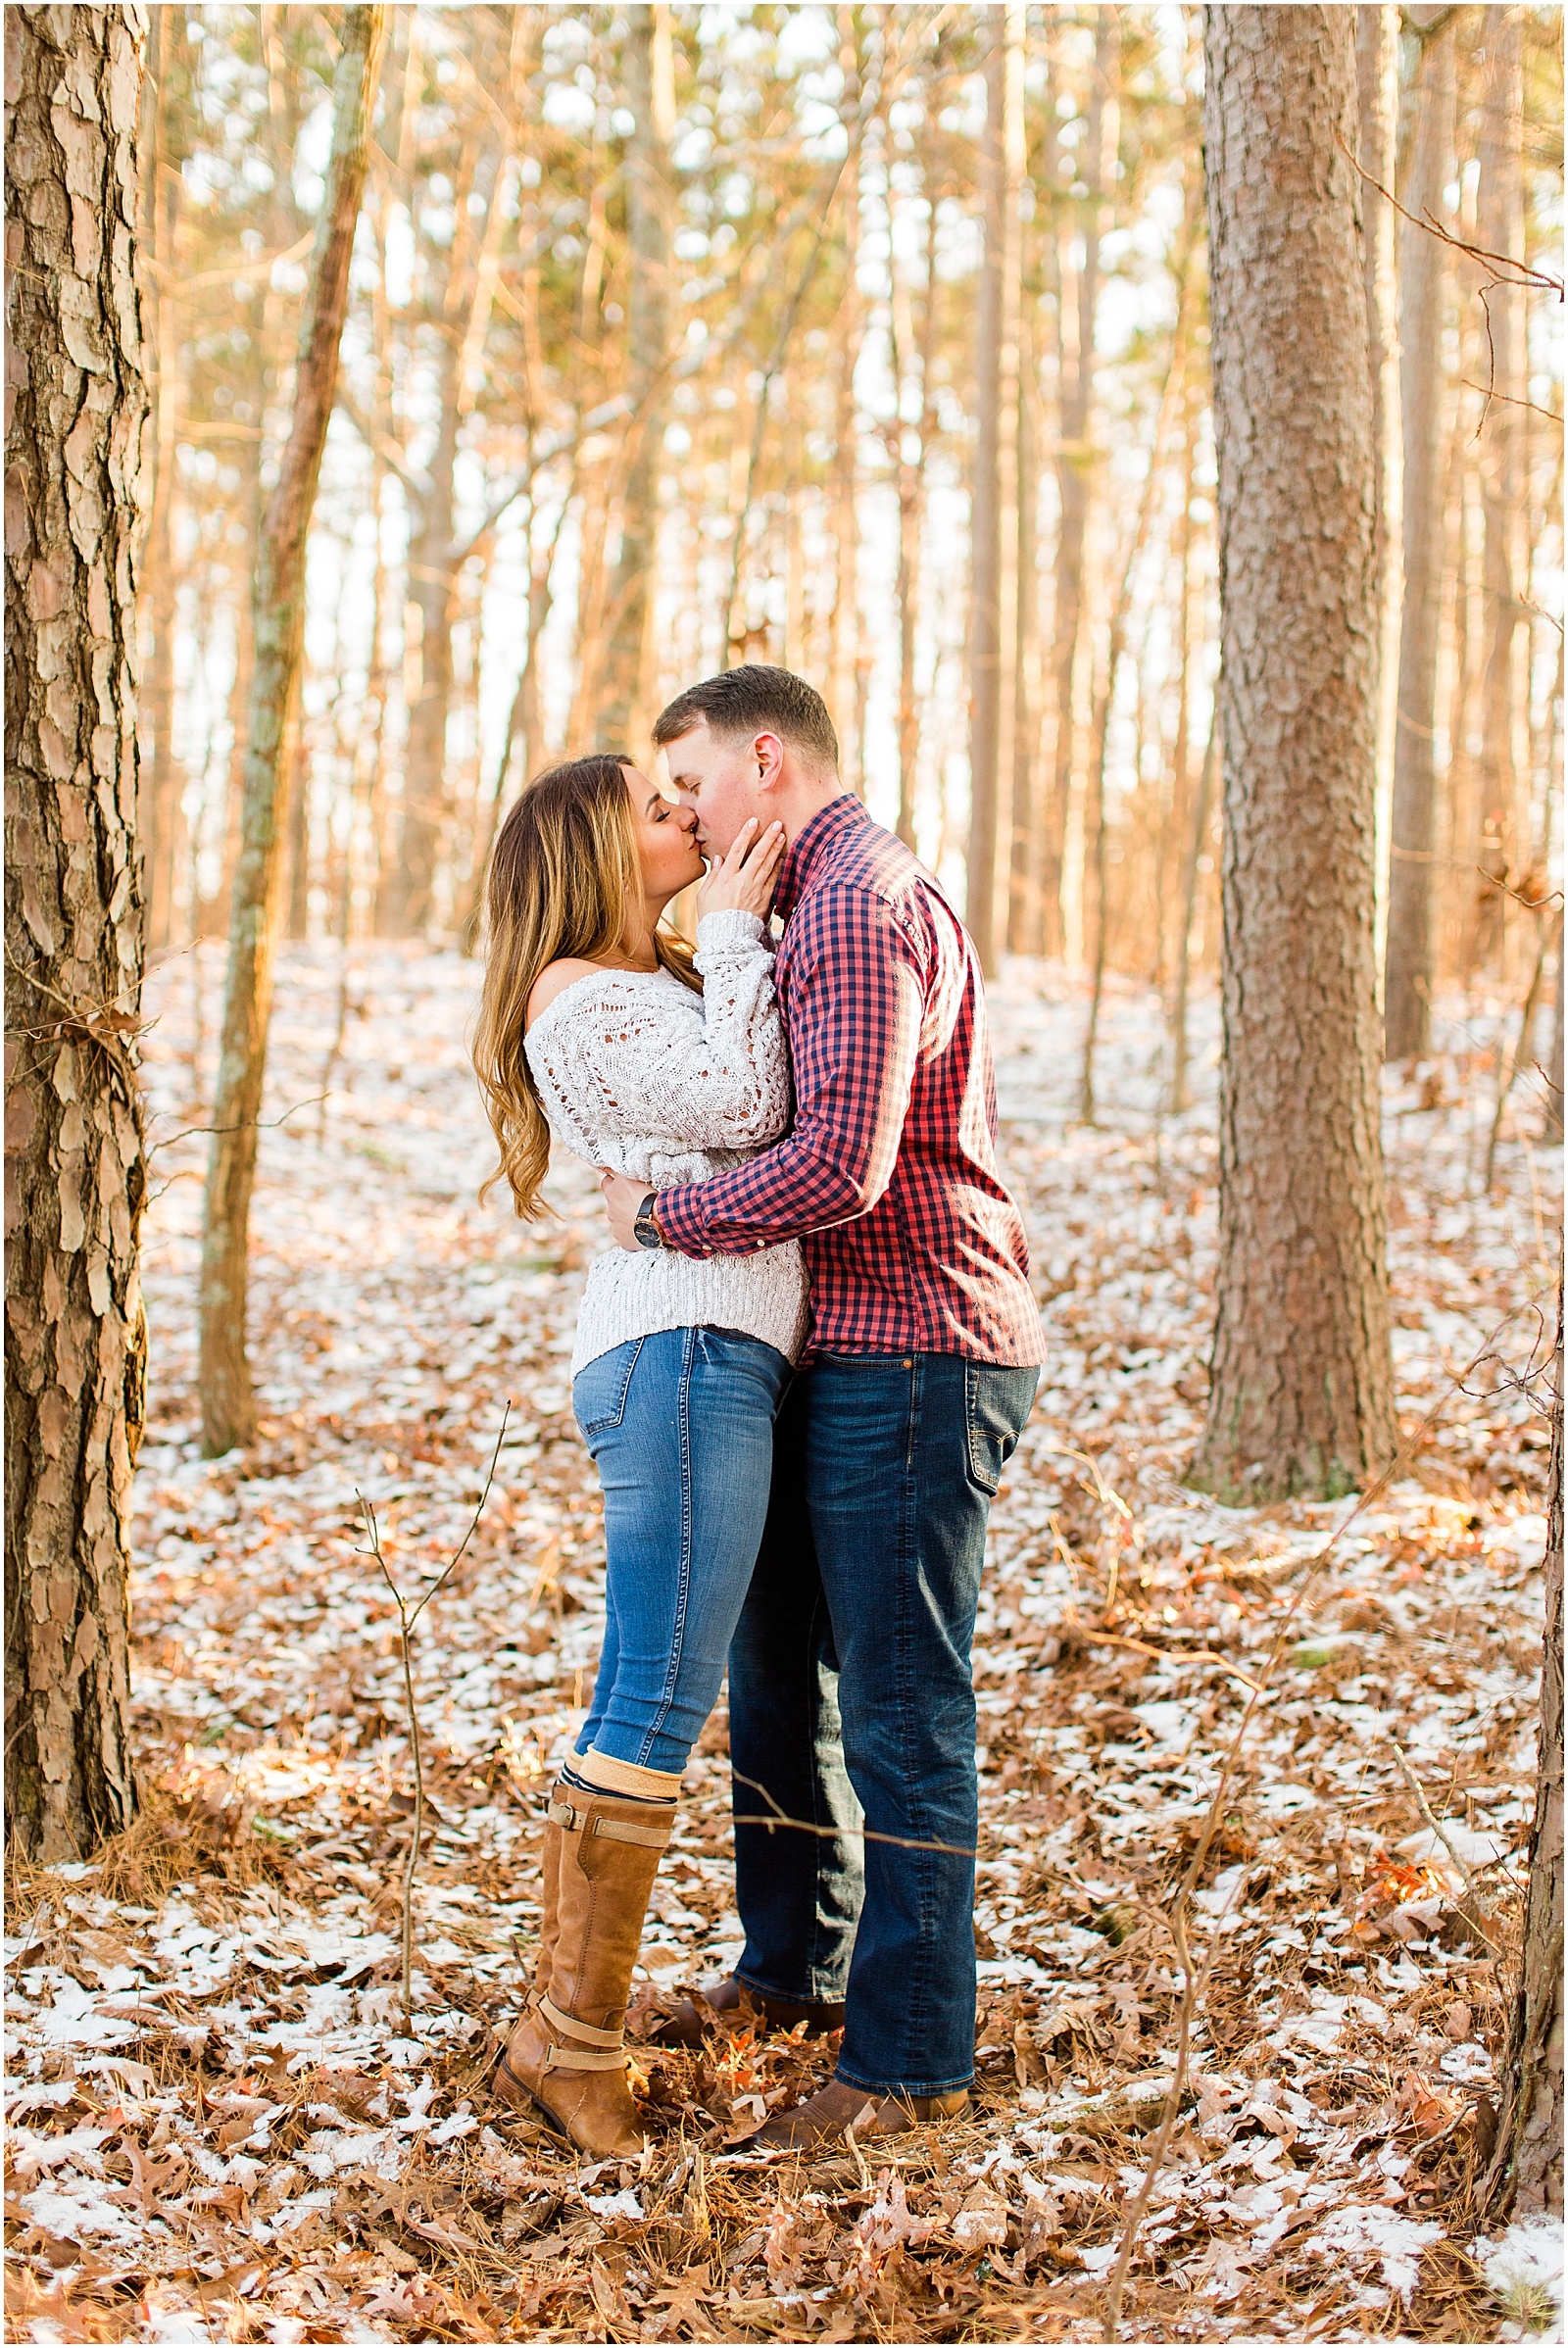 A Sunny Garden of the Gods Engagement Session | Shiloh and Lee | Bret and Brandie Photography042.jpg